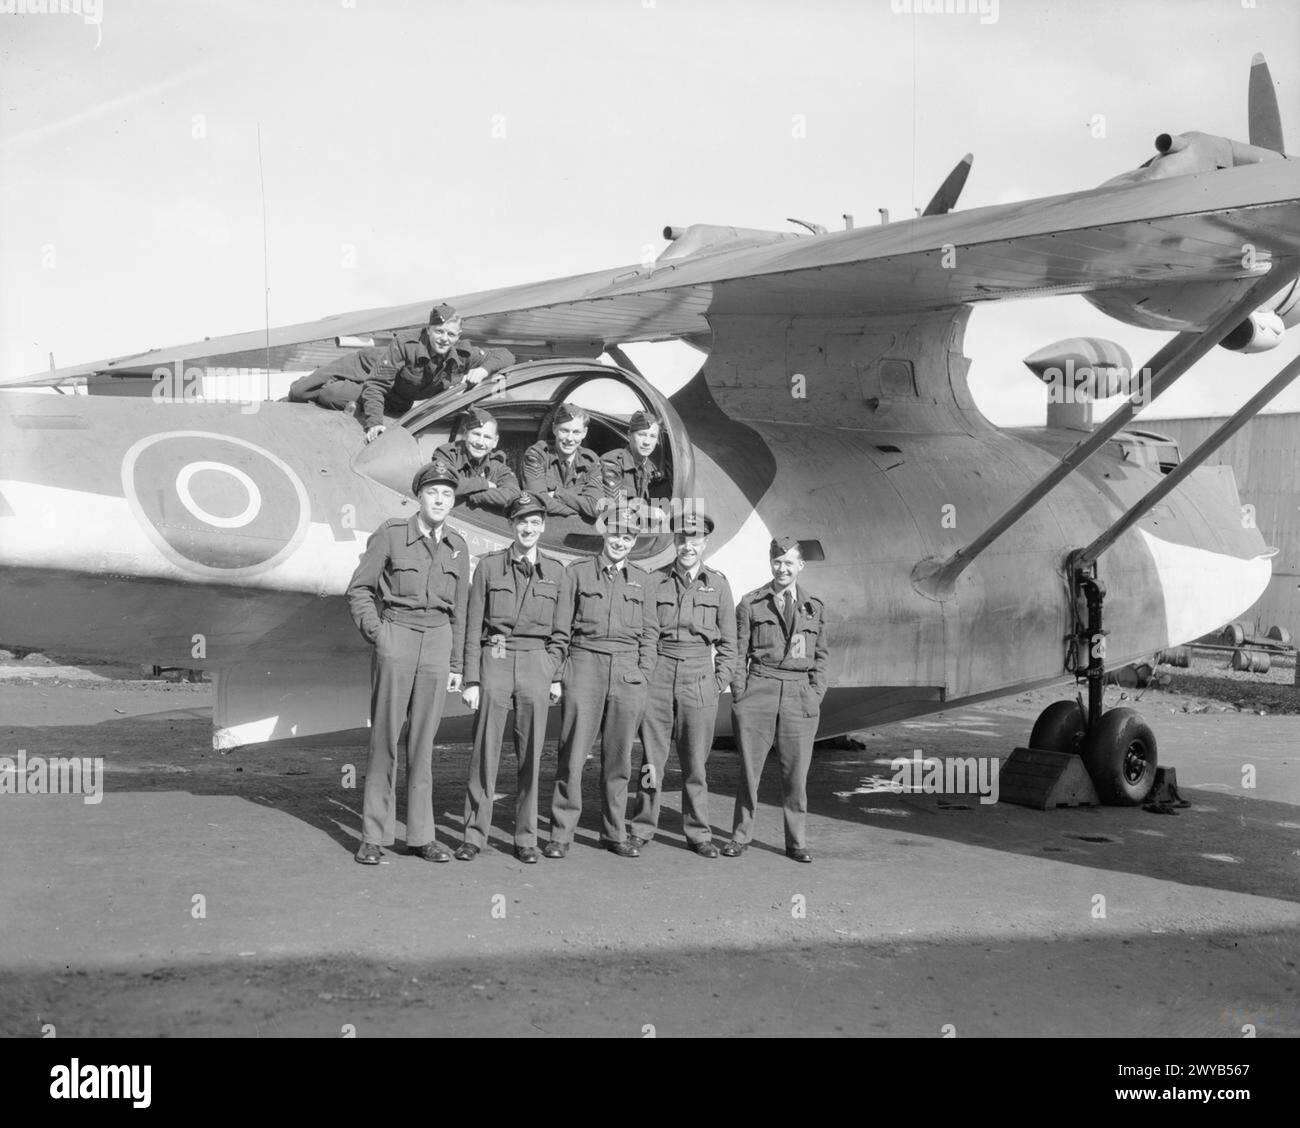 ROYAL AIR FORCE COASTAL COMMAND, 1939-1945. - The crew of Consolidated Catalina Mark IV 'X' of No. 210 Squadron RAF, who made the last attack of the war on a German submarine, stand by their aircraft at Sullom Voe, Shetland. In the early hours of 7 May 1945 they depth-charged the type VIIC/41 submarine, U-320, west of Bergen, Norway. The U-boat was badly damaged and, despite an attempt at repairs by the crew, sank off the Norwegian coast on 9 May. The Catalina's crew are: front row (left to right); Flying Officer C Humphrey (navigator), Flying Officer F Weston (3rd pilot), Flight Lieutenant K Stock Photo